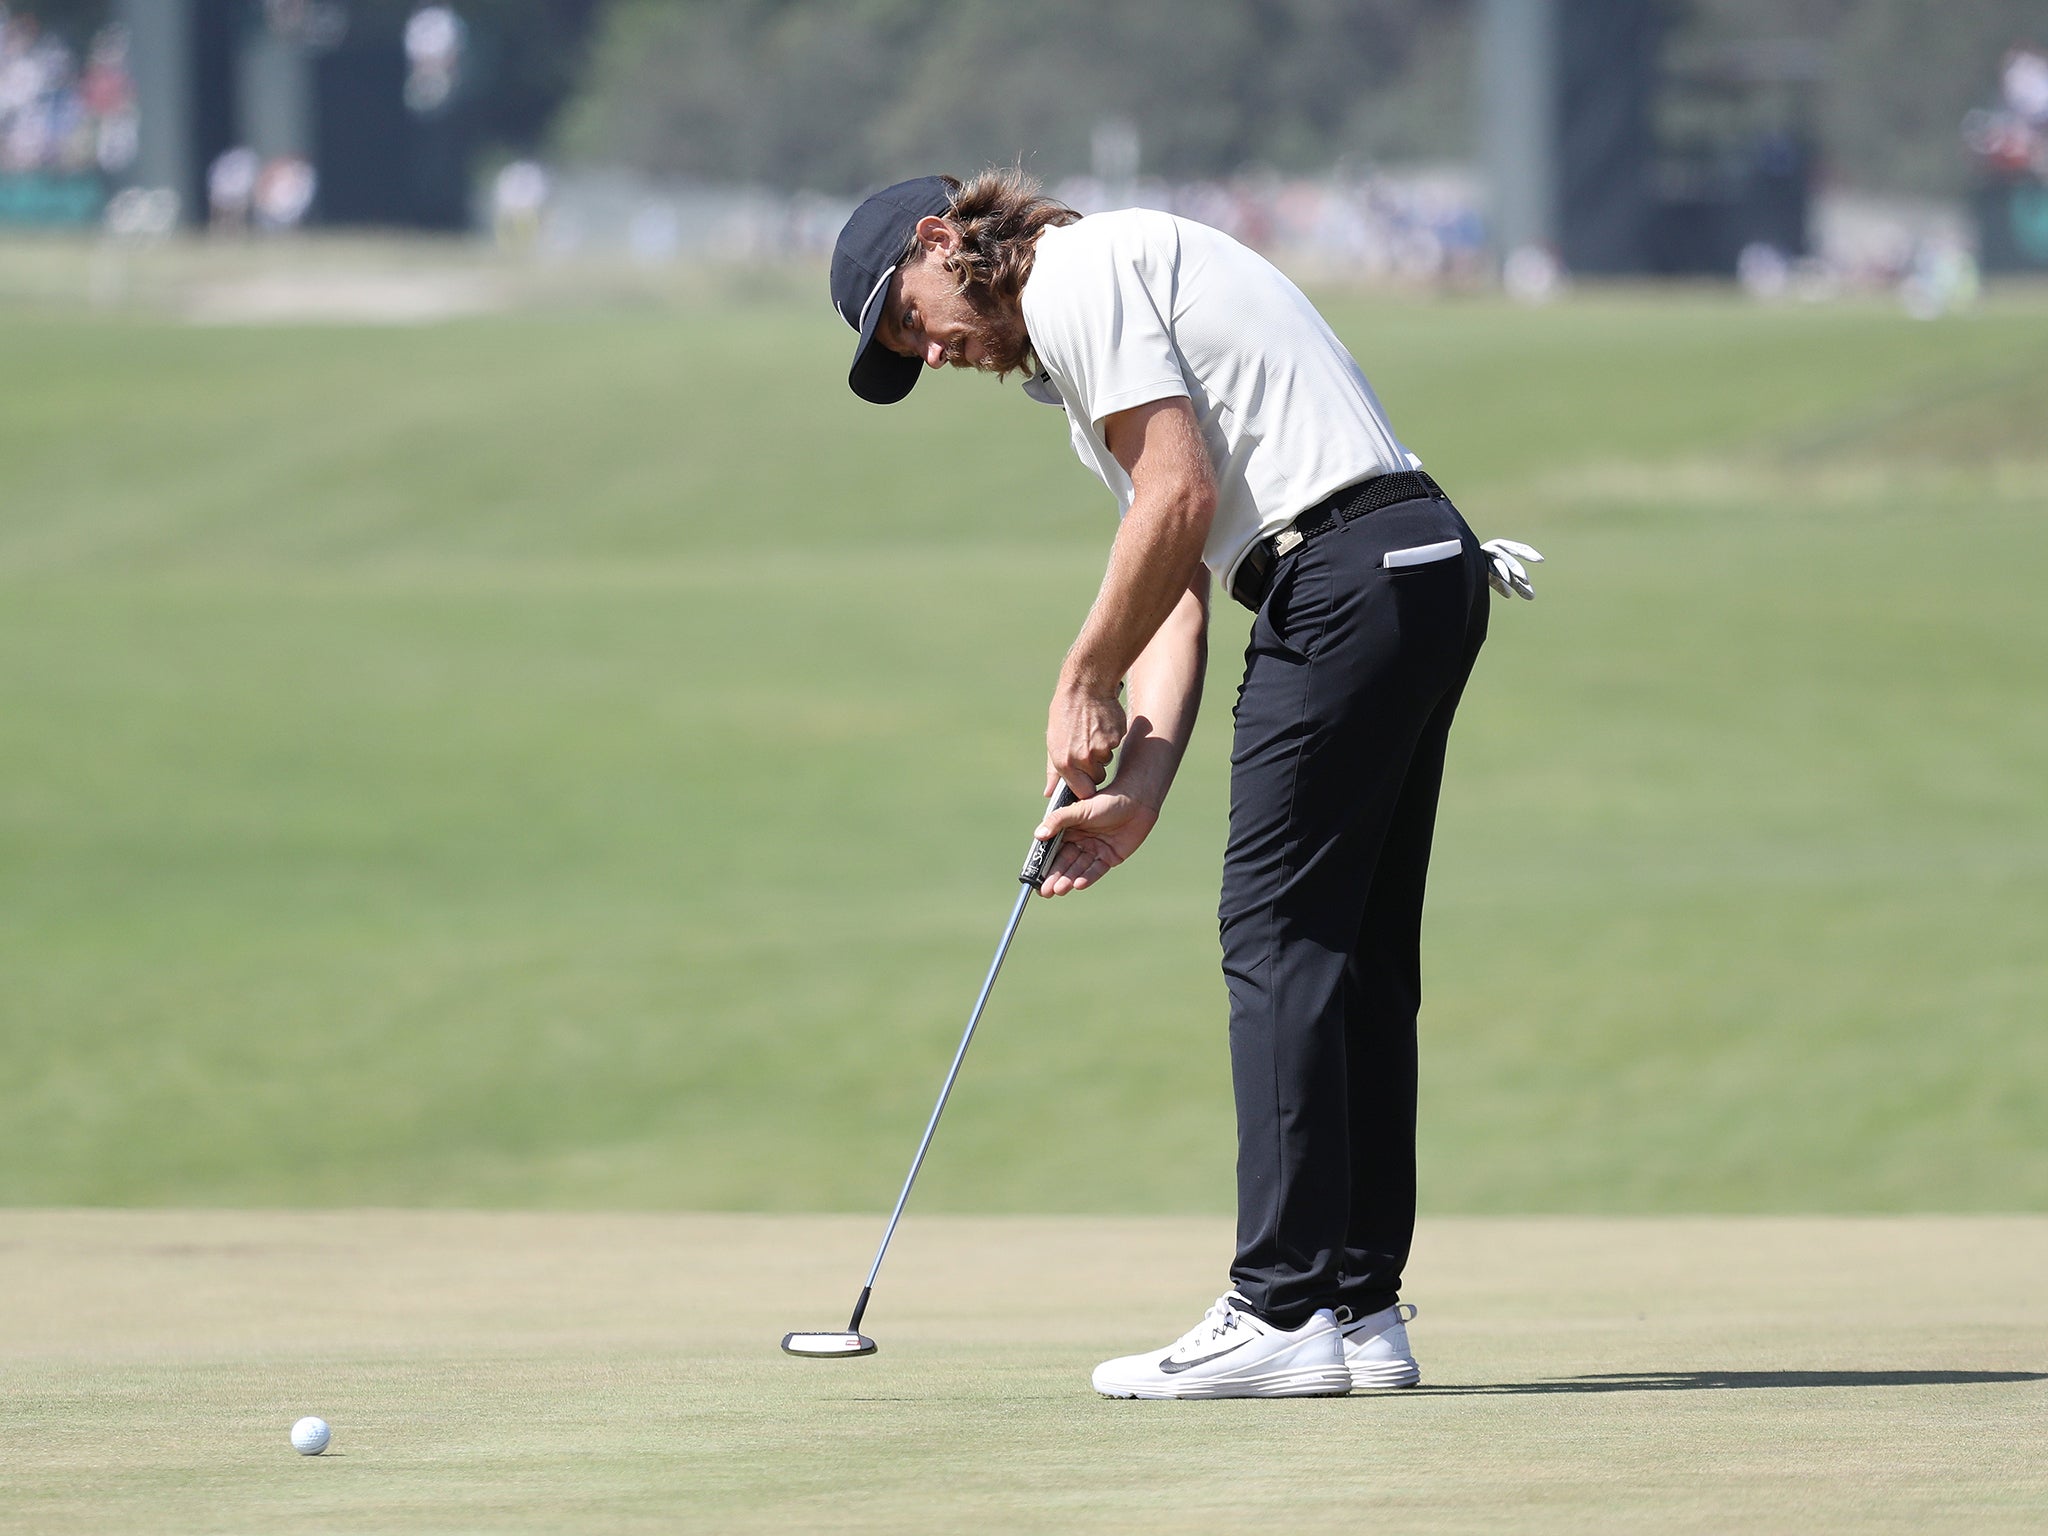 Tommy Fleetwood missed putt to record the first US Open round of 62